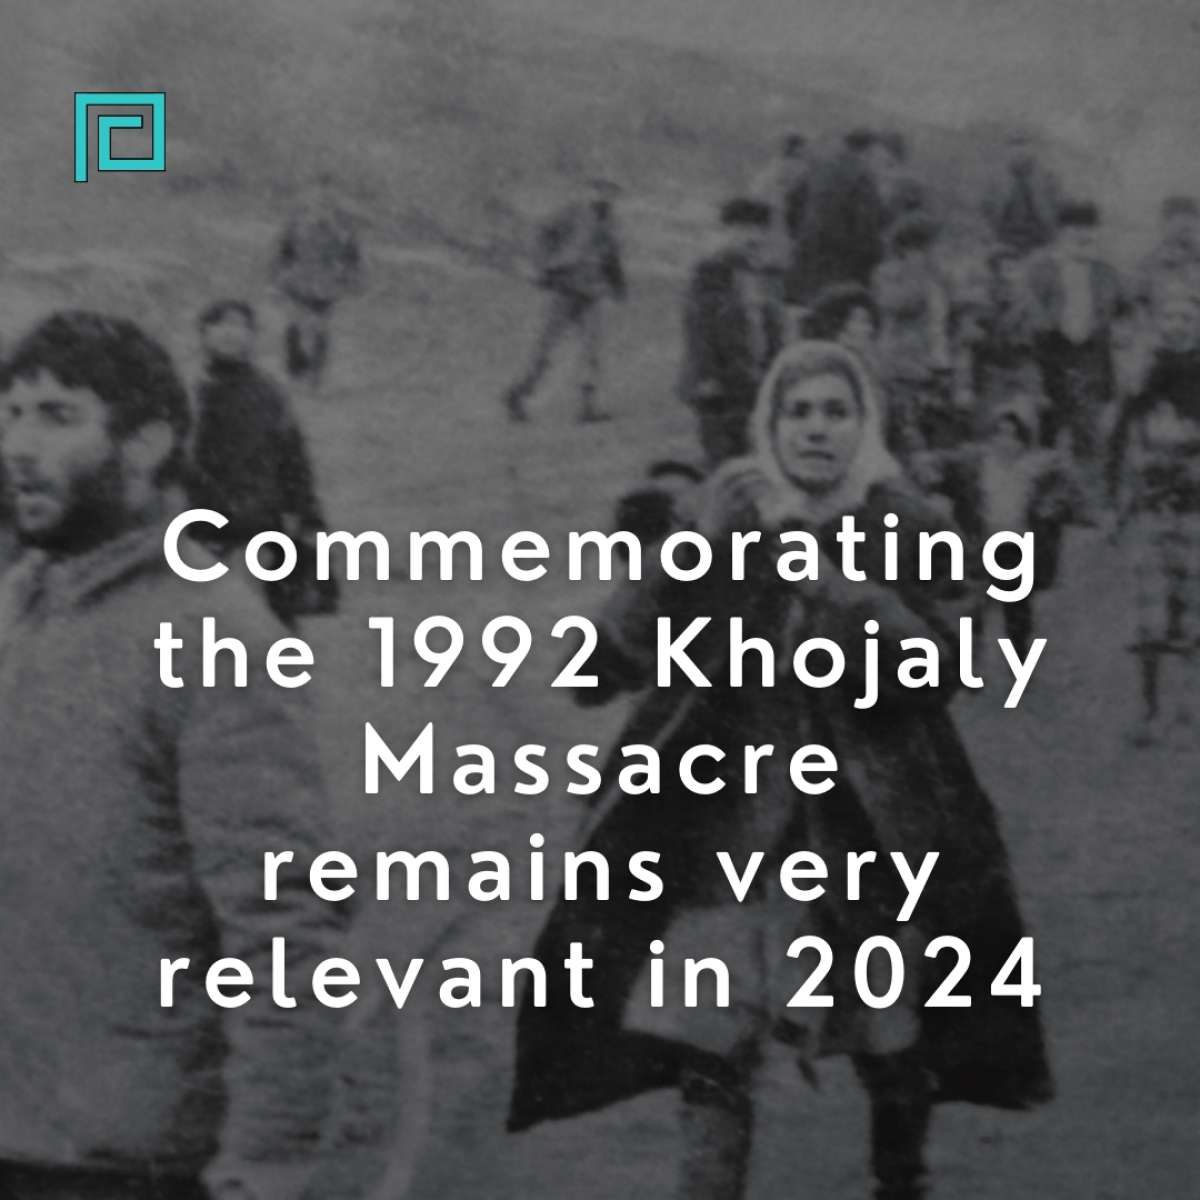 Commemorating the 1992 Khojaly Massacre remains very relevant in 2024